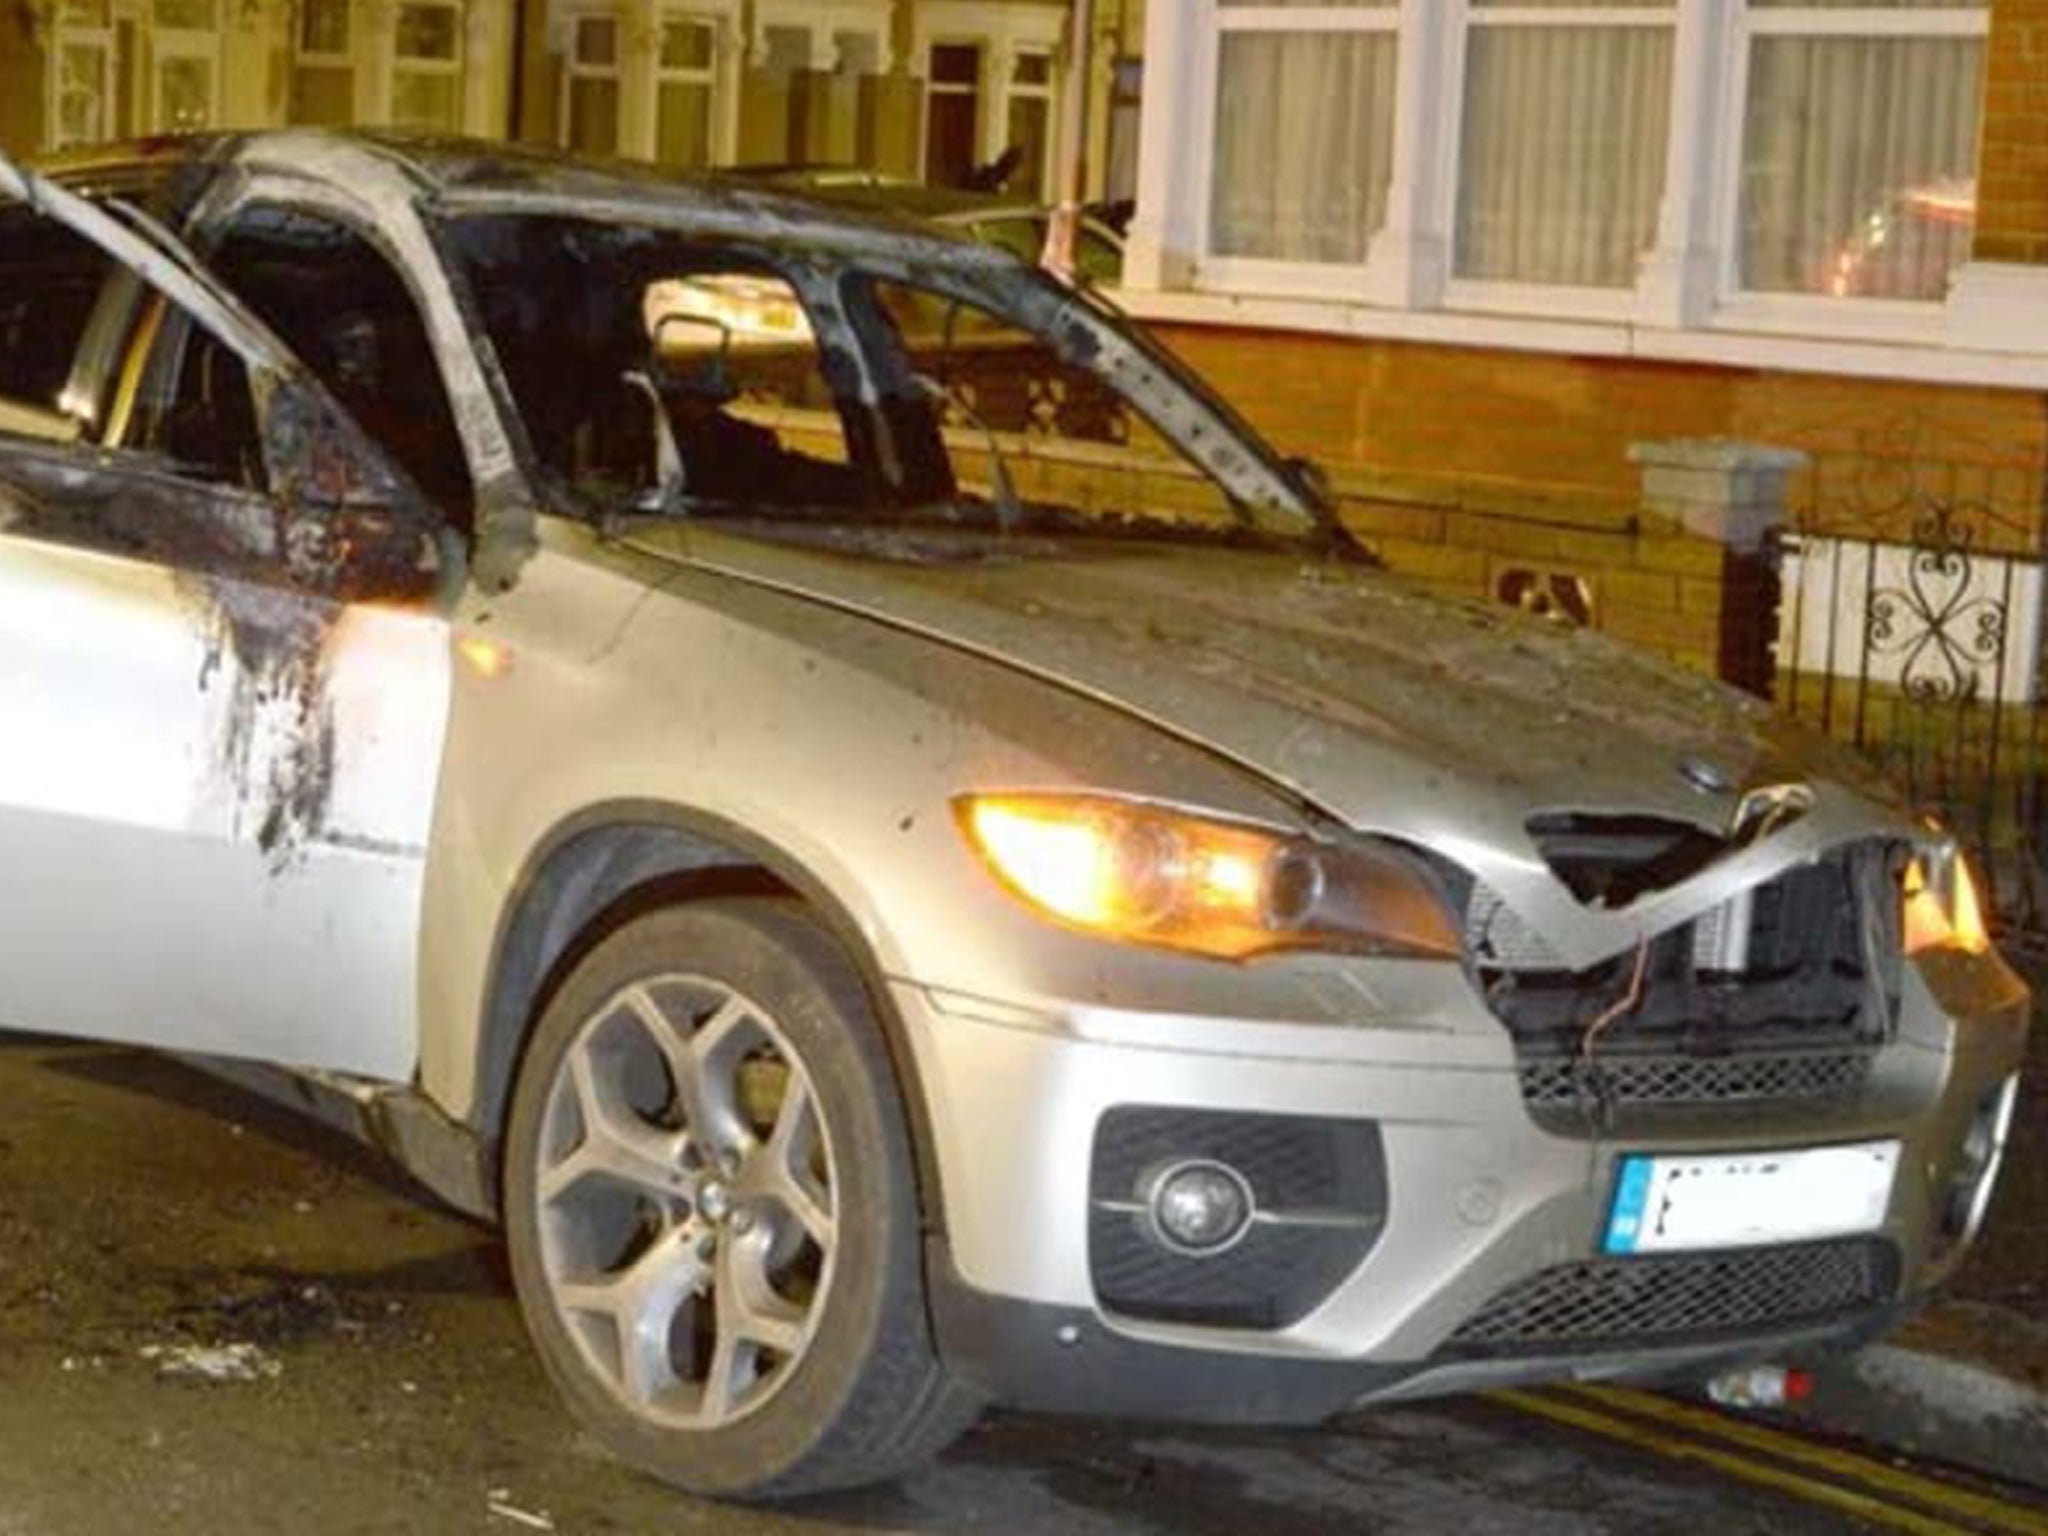 Son torched car down the road from home after he and father killed ‘friend'